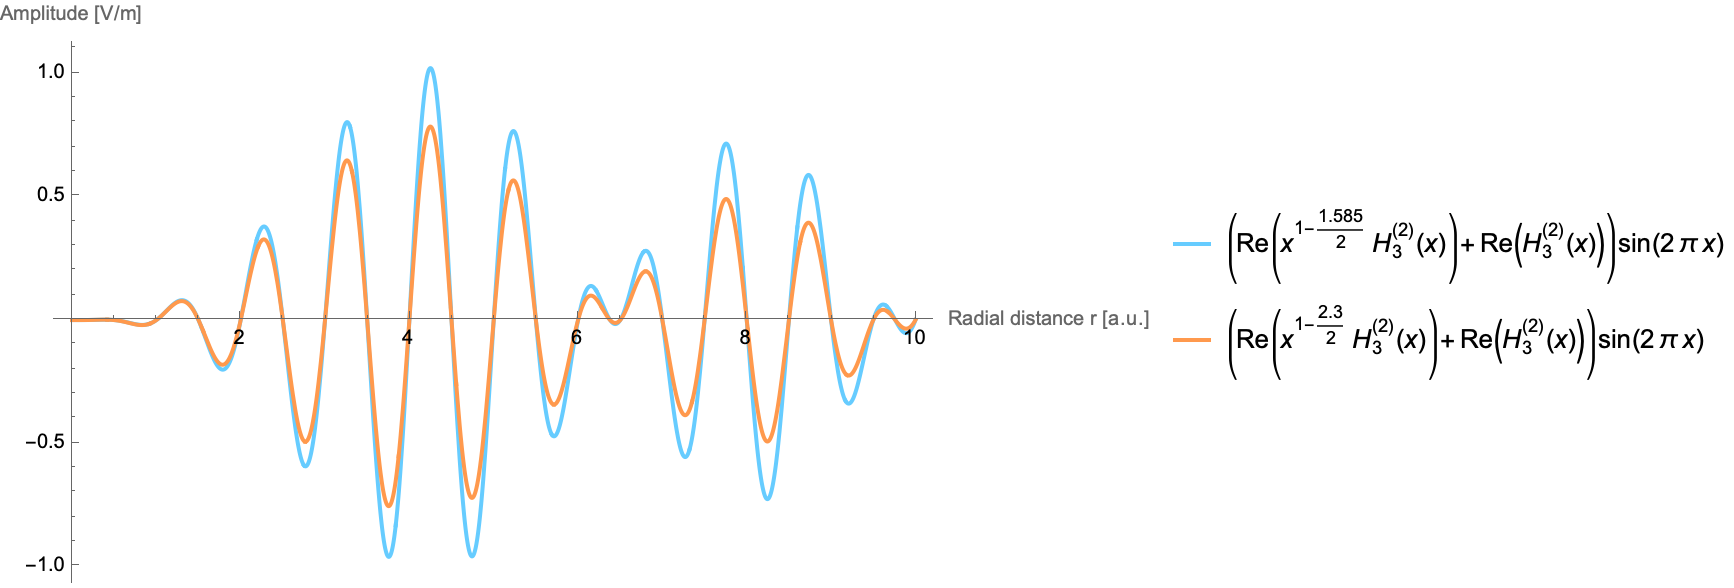 Radial Distance